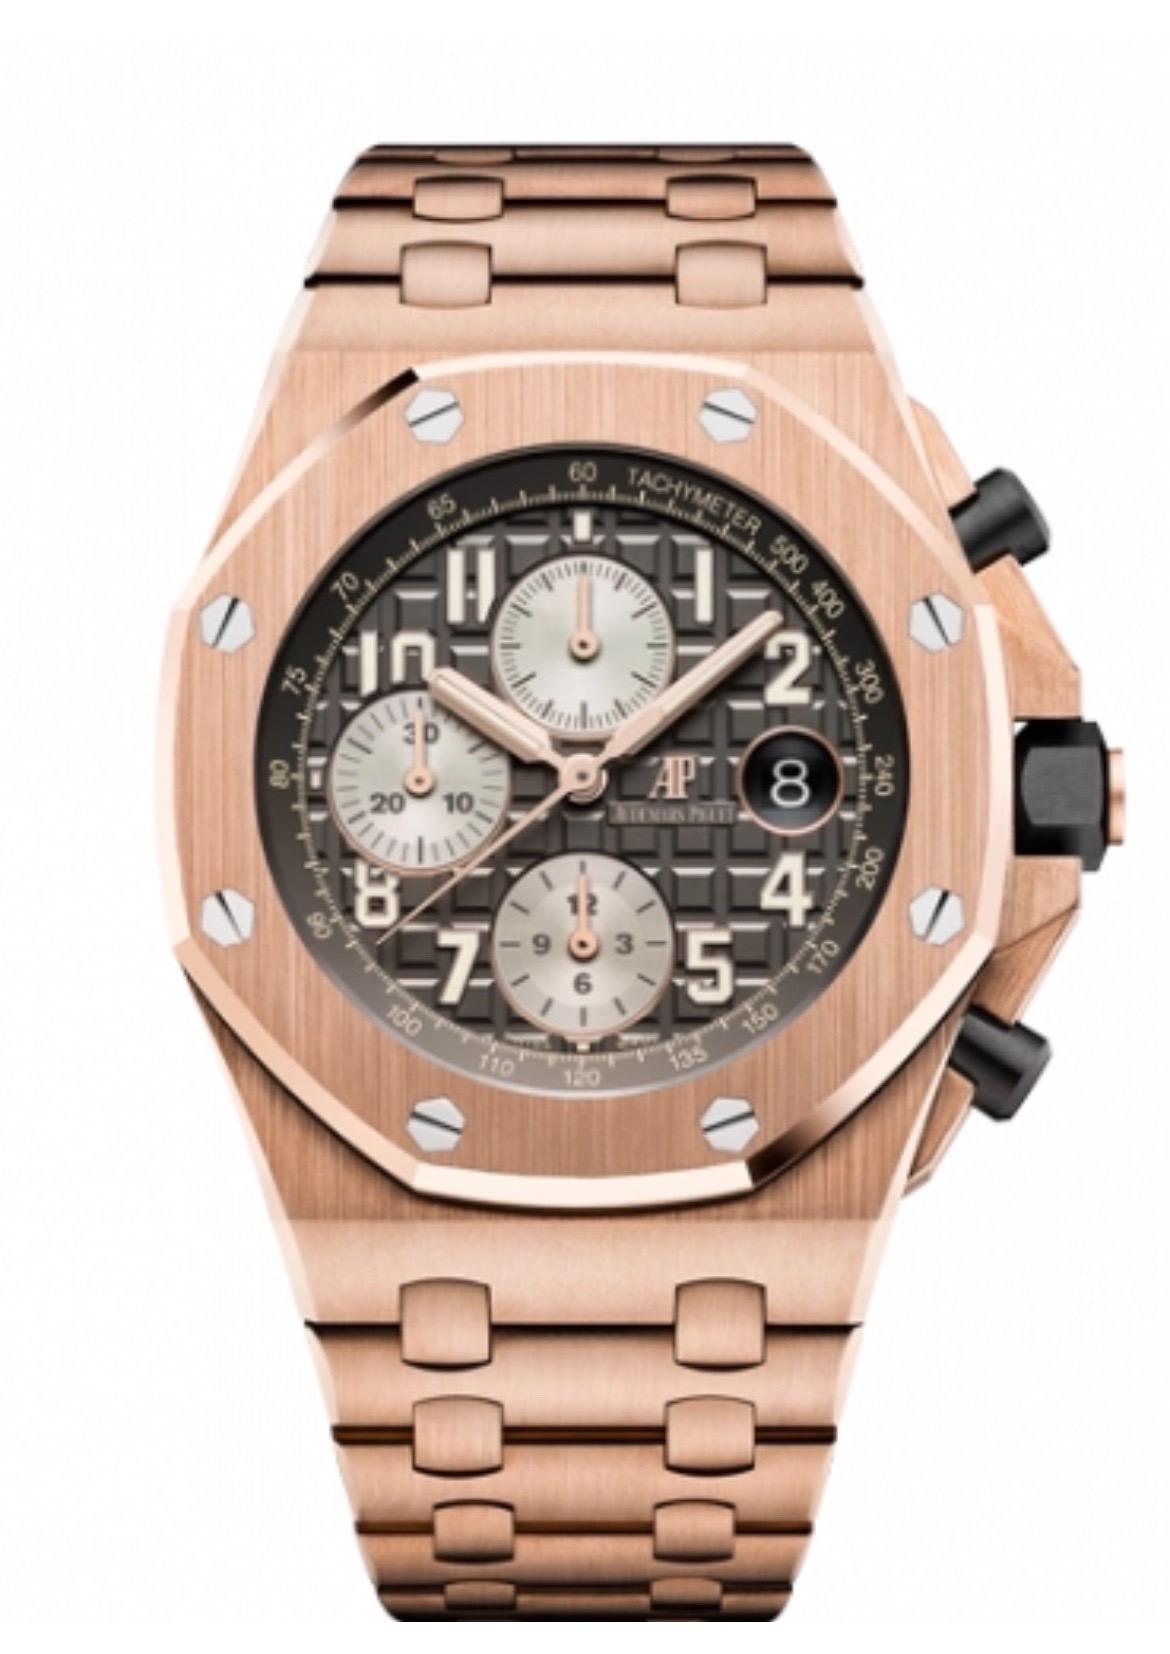 Highly Coveted Audemars Piguet watch.
Includes interchangeable Gold Bracelet
The Audemars Piguet Royal Oak is a modern day icon, a timepiece disruptor that changed watchmaking forever in 1972. The octagonal bezel, the “tapisserie” textured dial, and